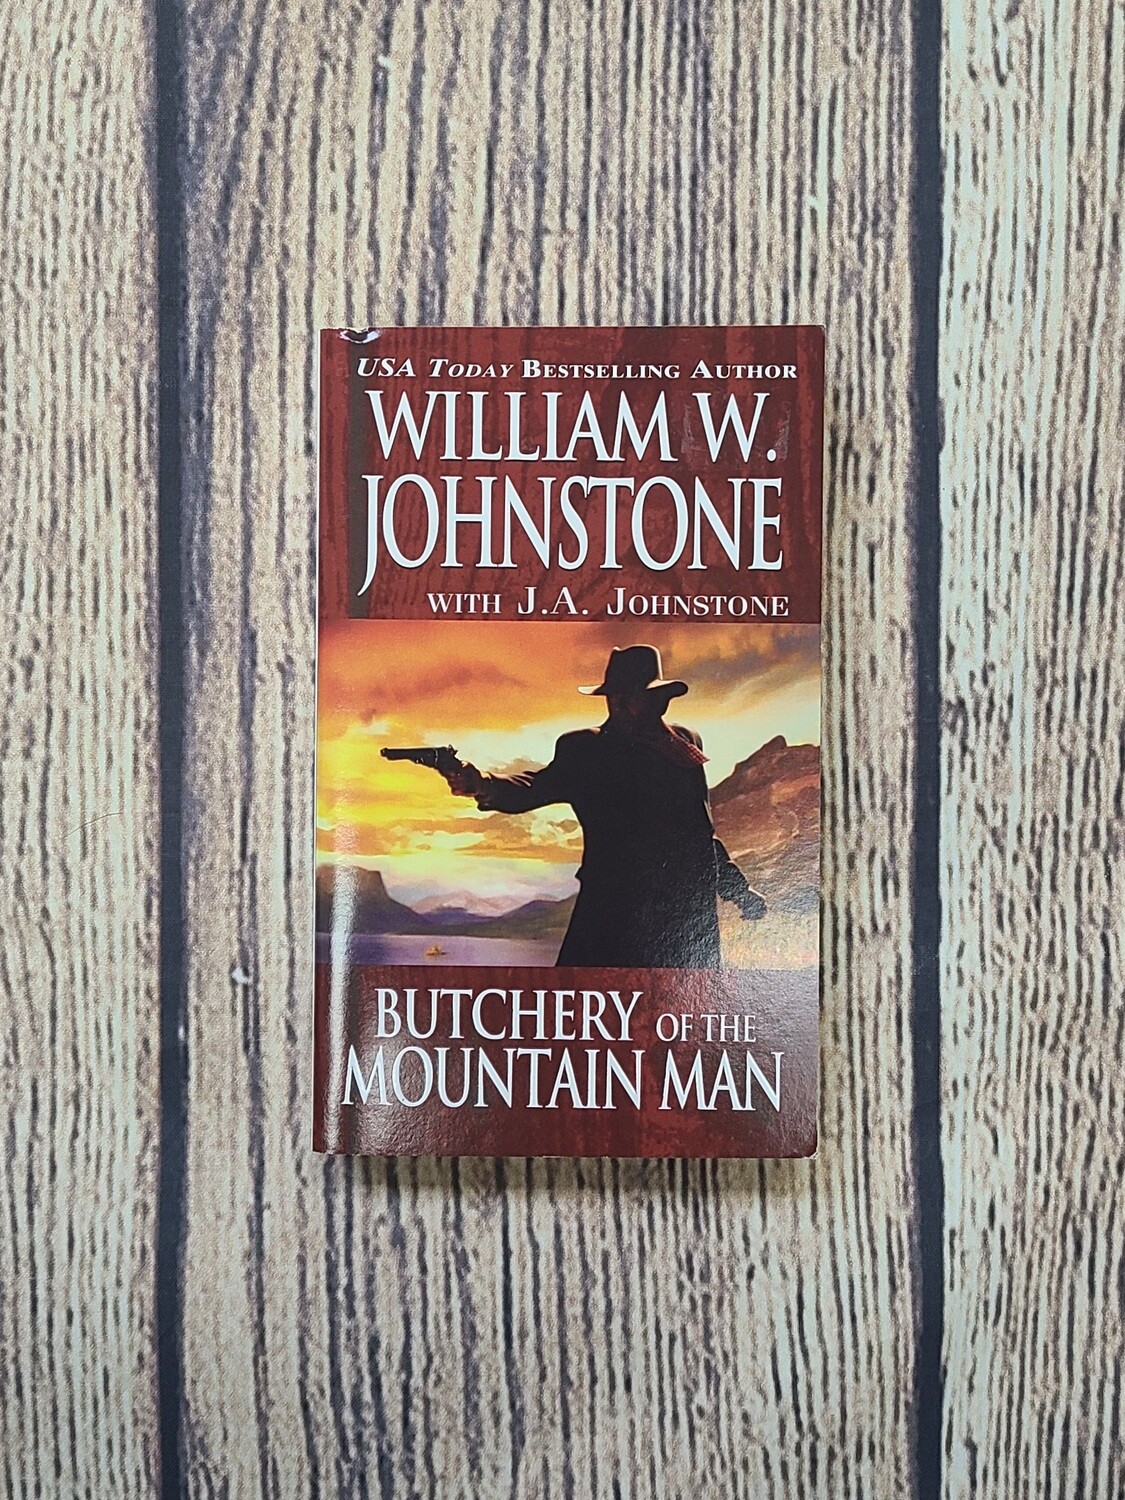 Butchery of the Mountain Man by William W. Johnstone with J.A. Johnstone